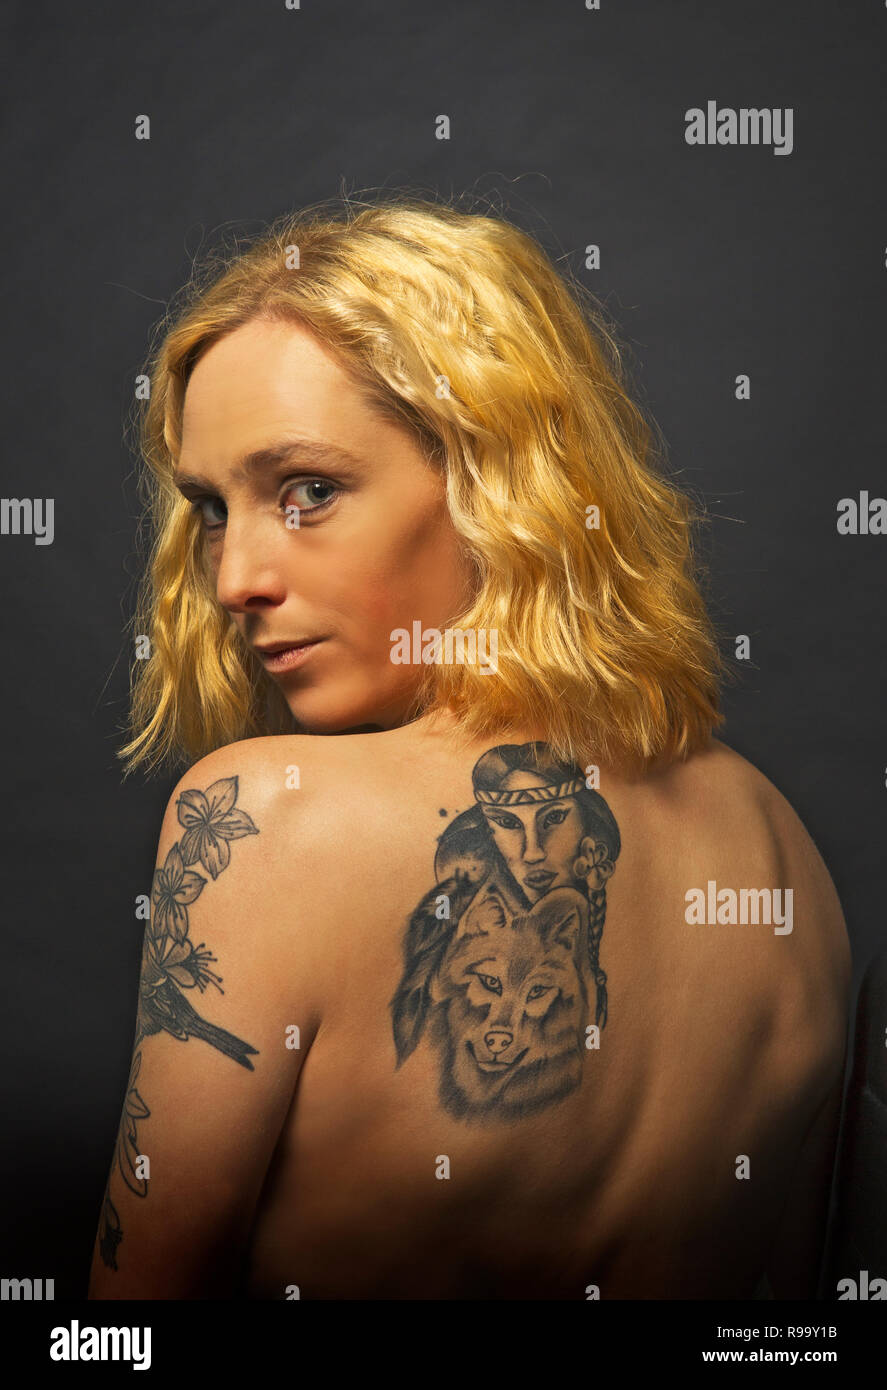 A young blond girl with a tattooed back Stock Photo